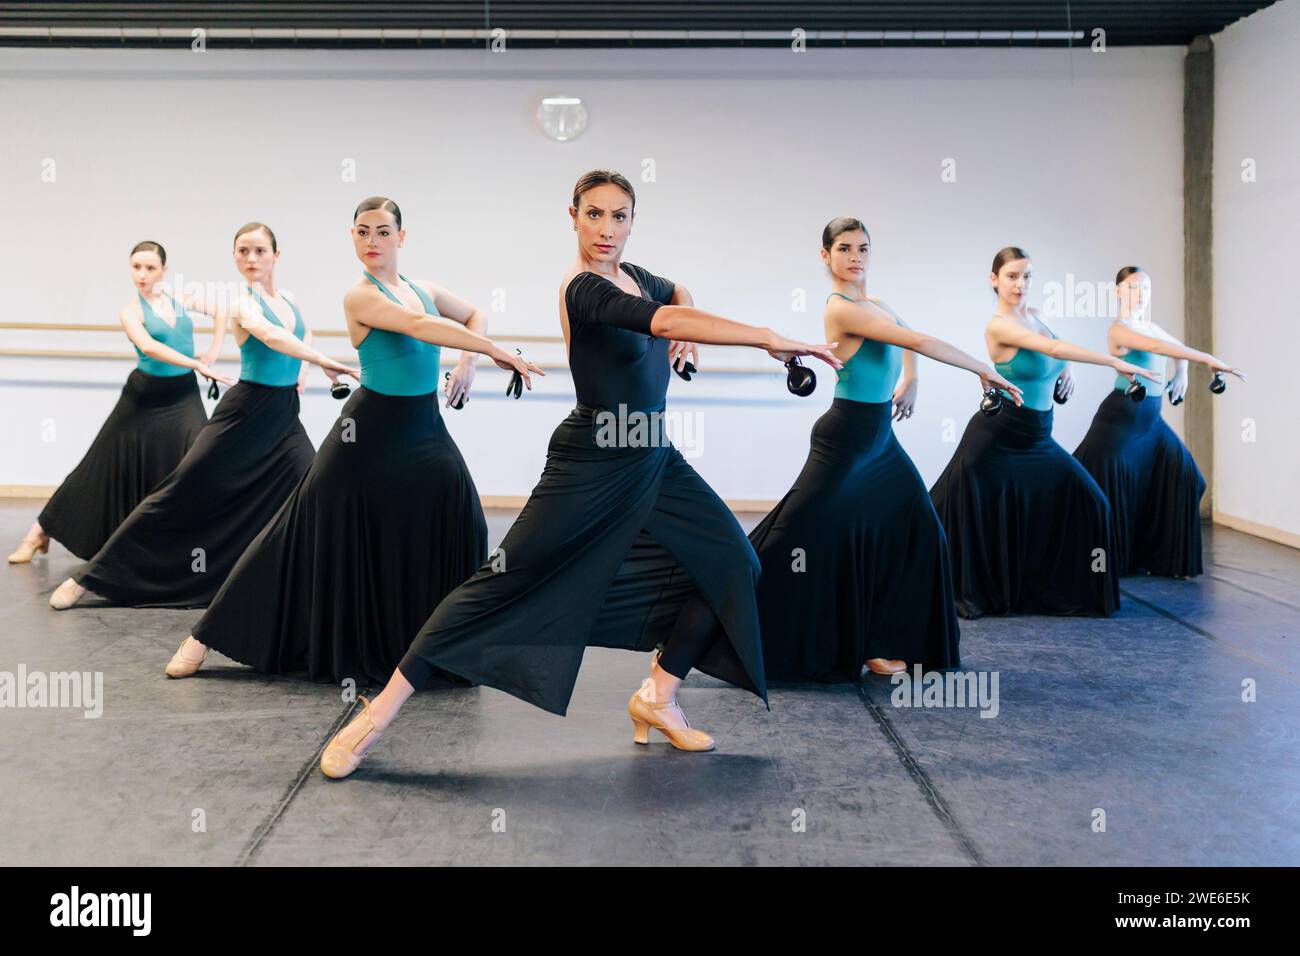 Confident instructor teaching flamenco dance to students at studio Stock Photo